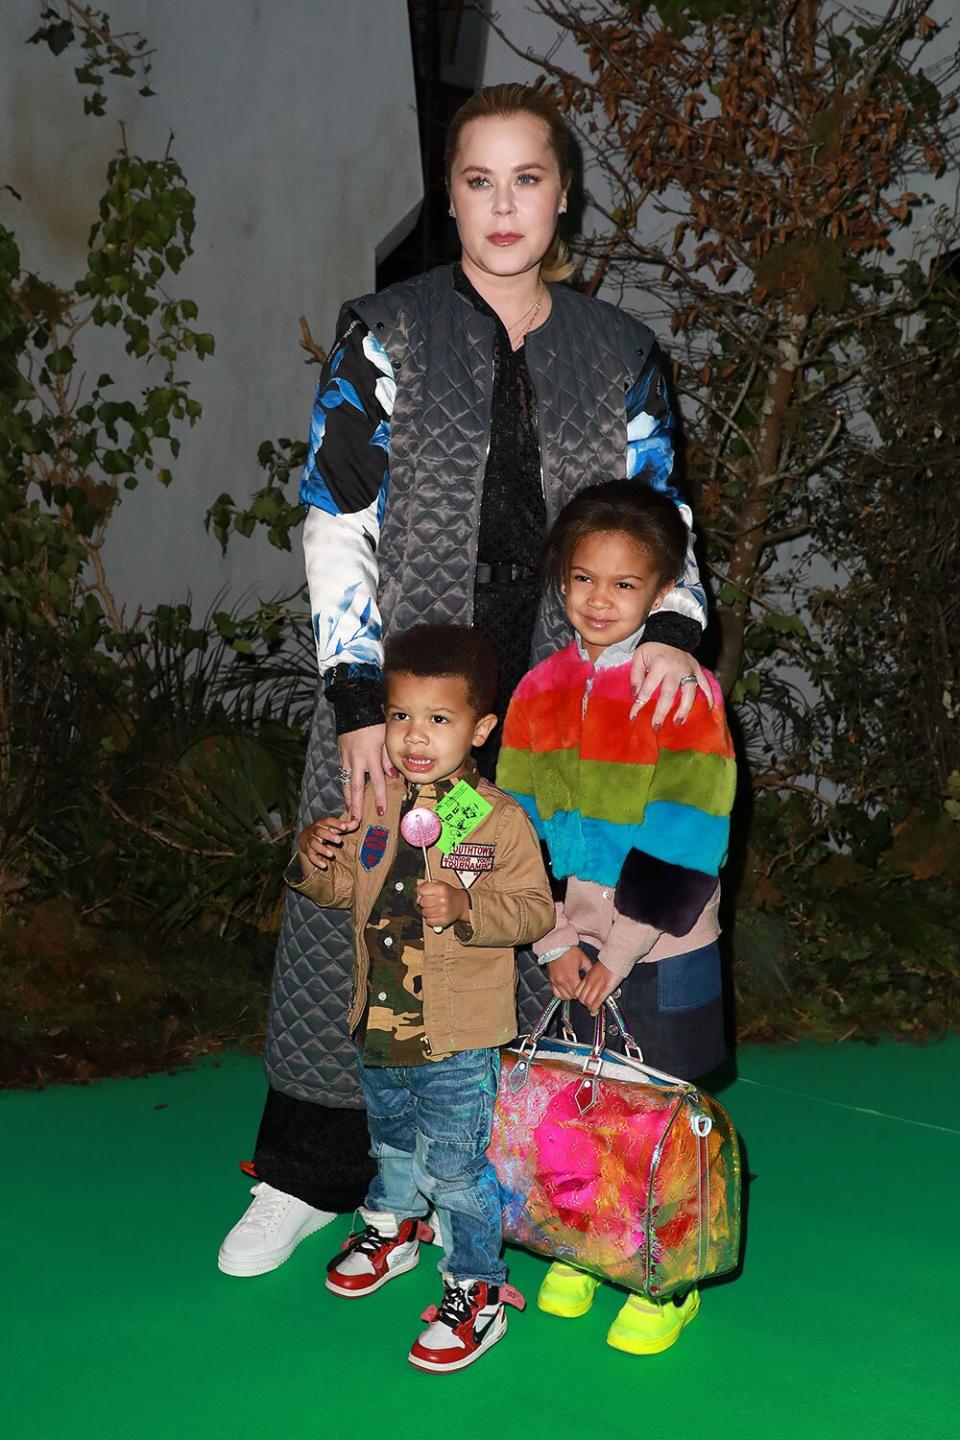 PARIS, FRANCE - JANUARY 16: Virgil Abloh's wife and her children Grey and Lowe attend the Off-White Menswear Fall/Winter 2019-2020 show as part of Paris Fashion Week on January 16, 2019 in Paris, France. (Photo by Pierre Suu/Getty Images)